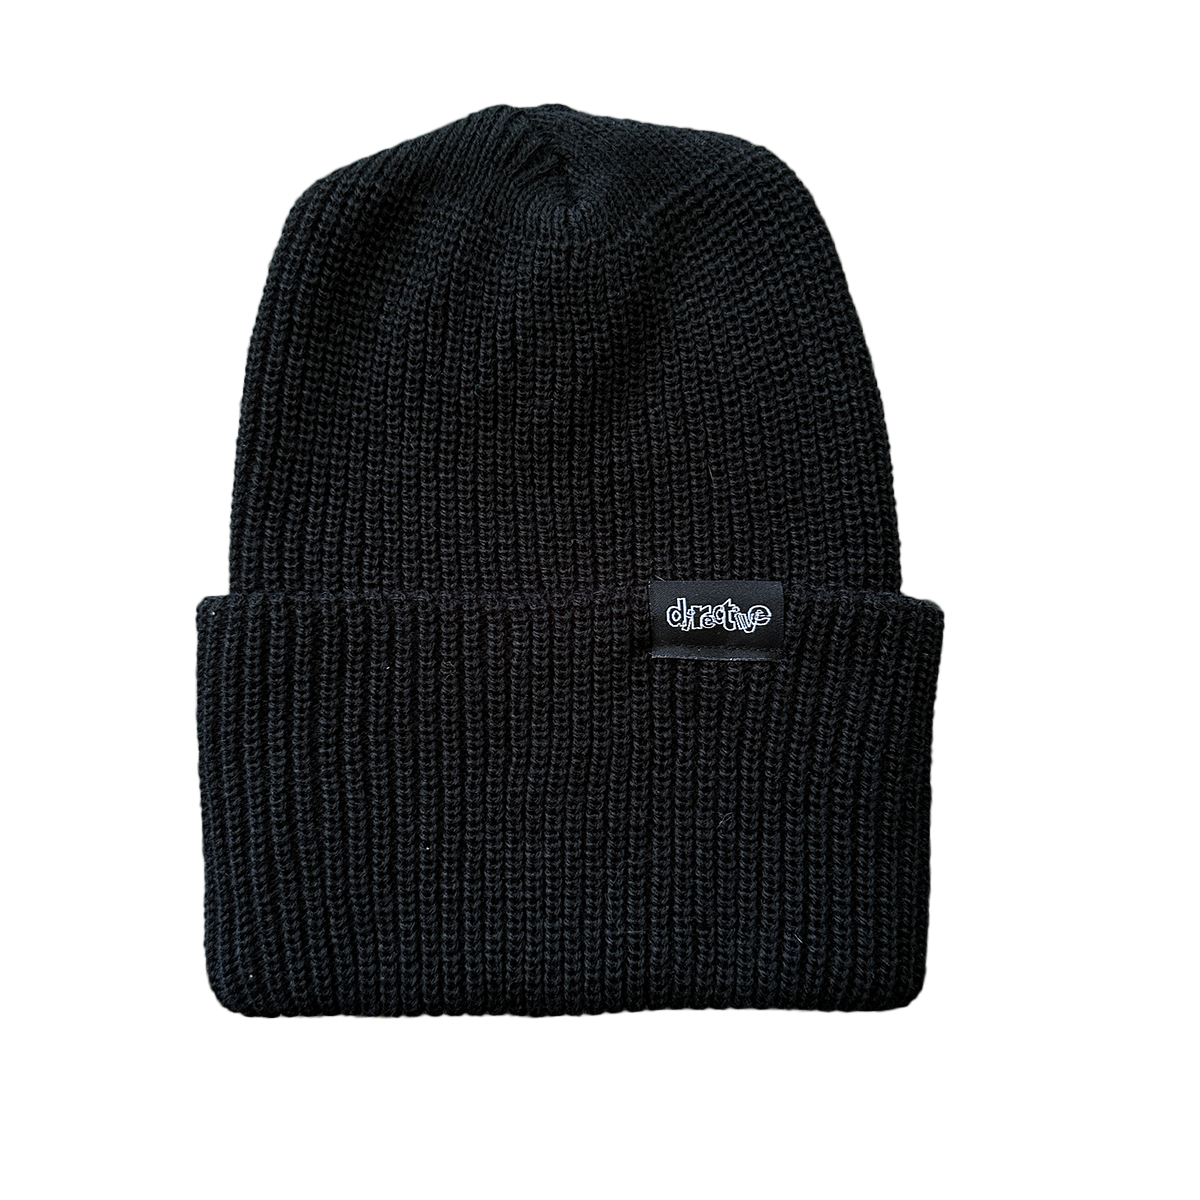 Directive Watchman Beanie - Assorted Colors